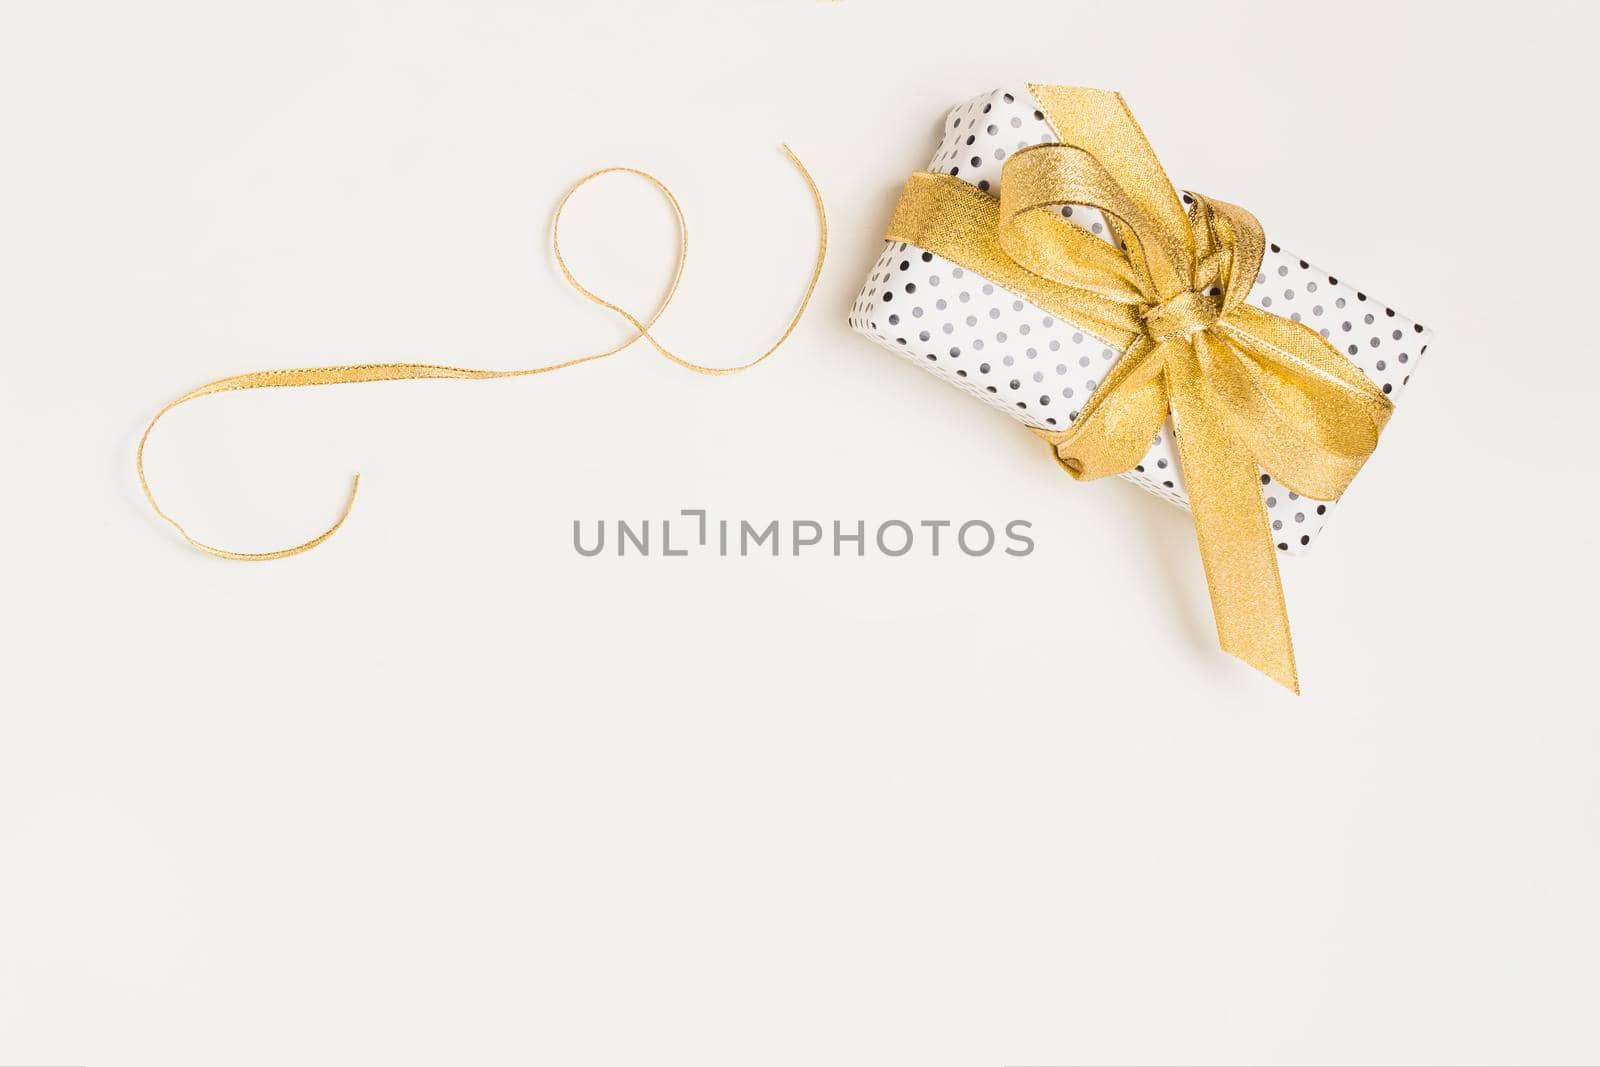 elevated view present box wrapped polka dot design paper with shiny golden ribbon isolated white backdrop by Zahard